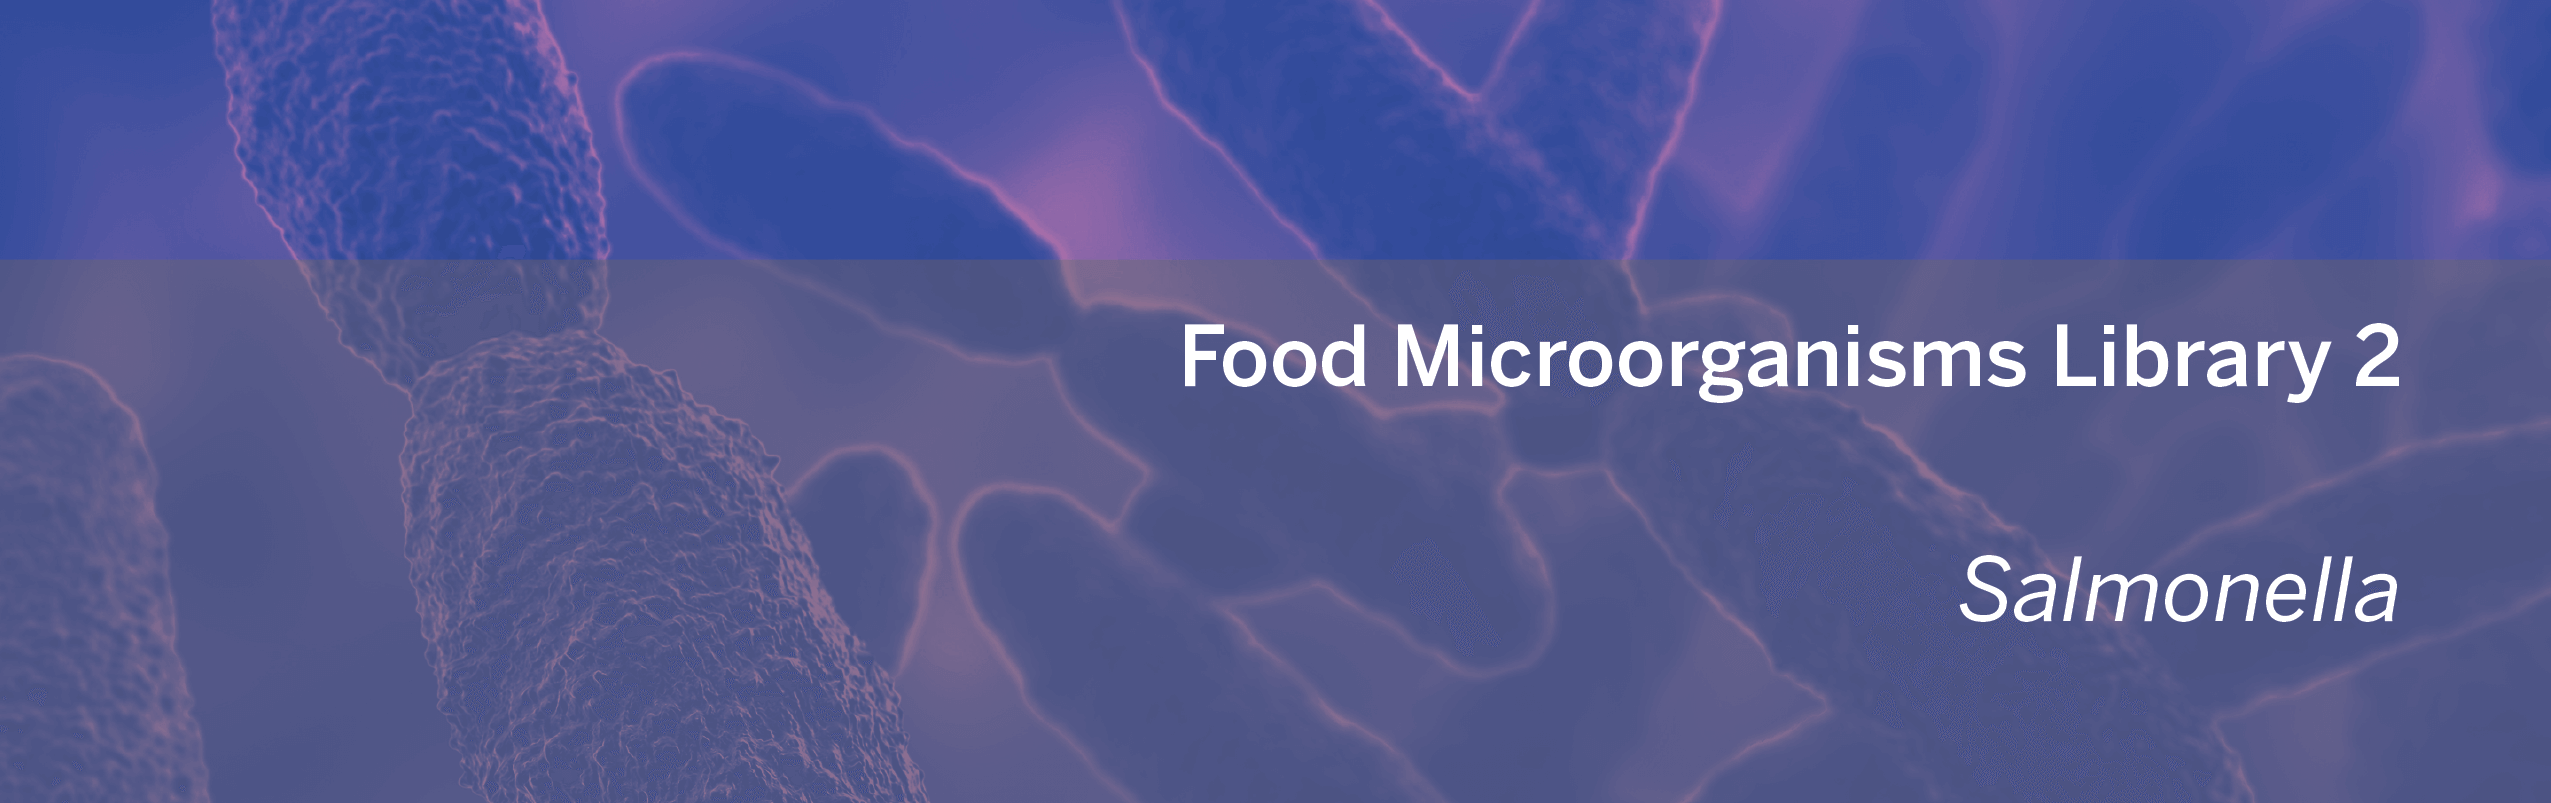 MOL0072107_Microorganisms-Library_Salmonella_Final-1.png